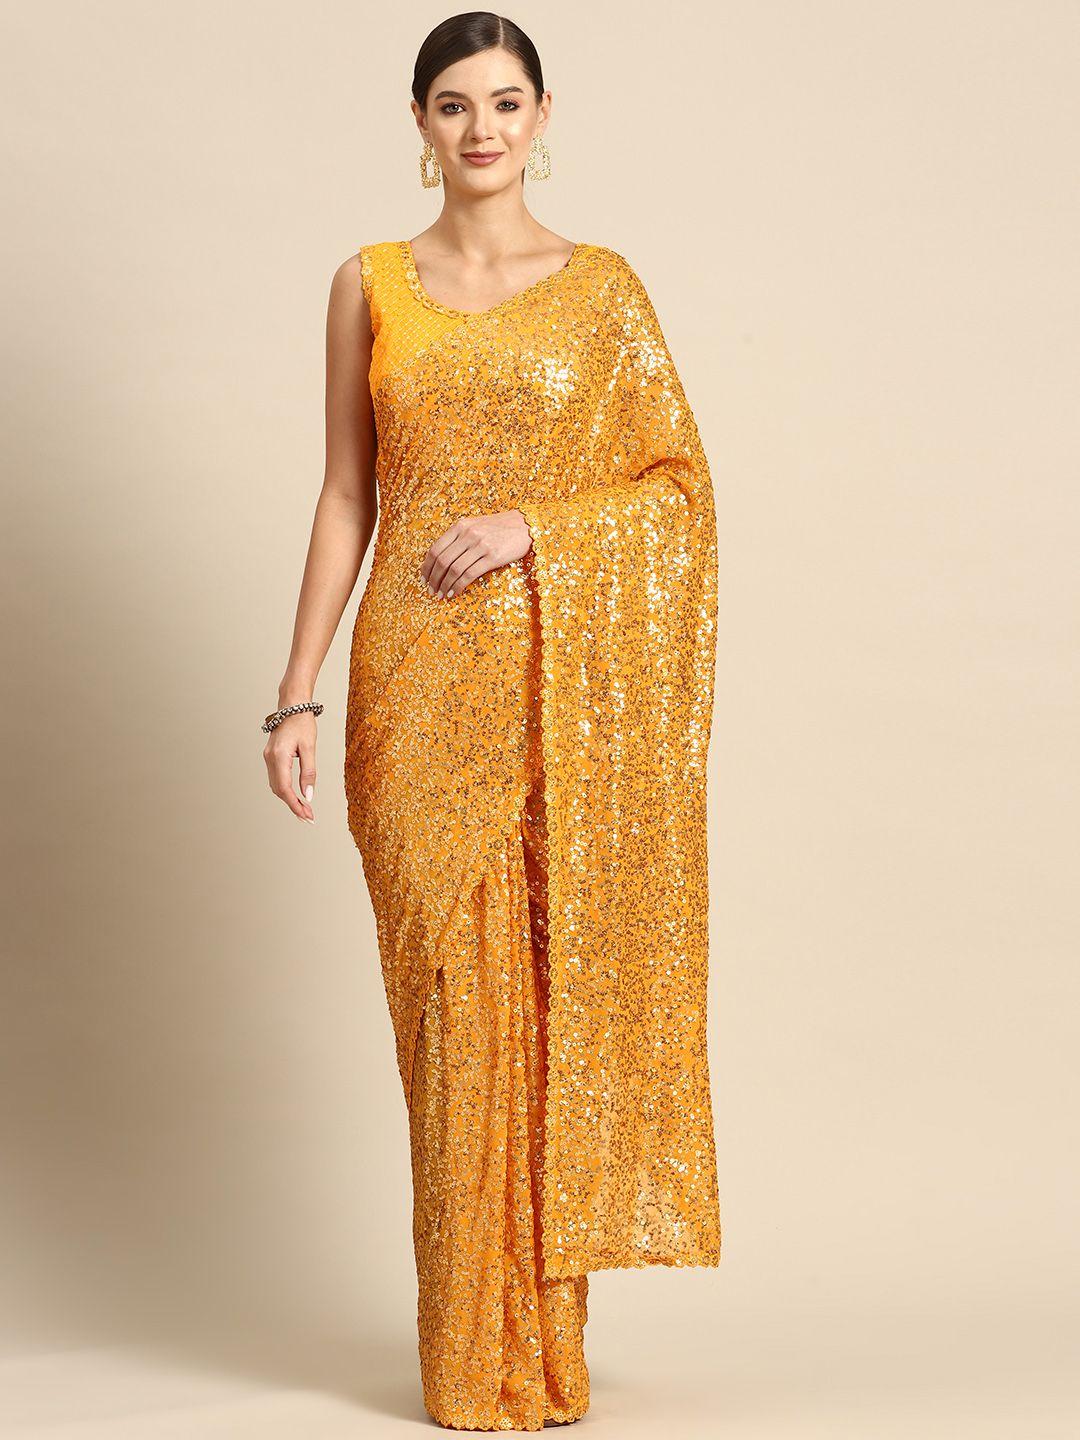 mizzific embellished sequinned georgette saree